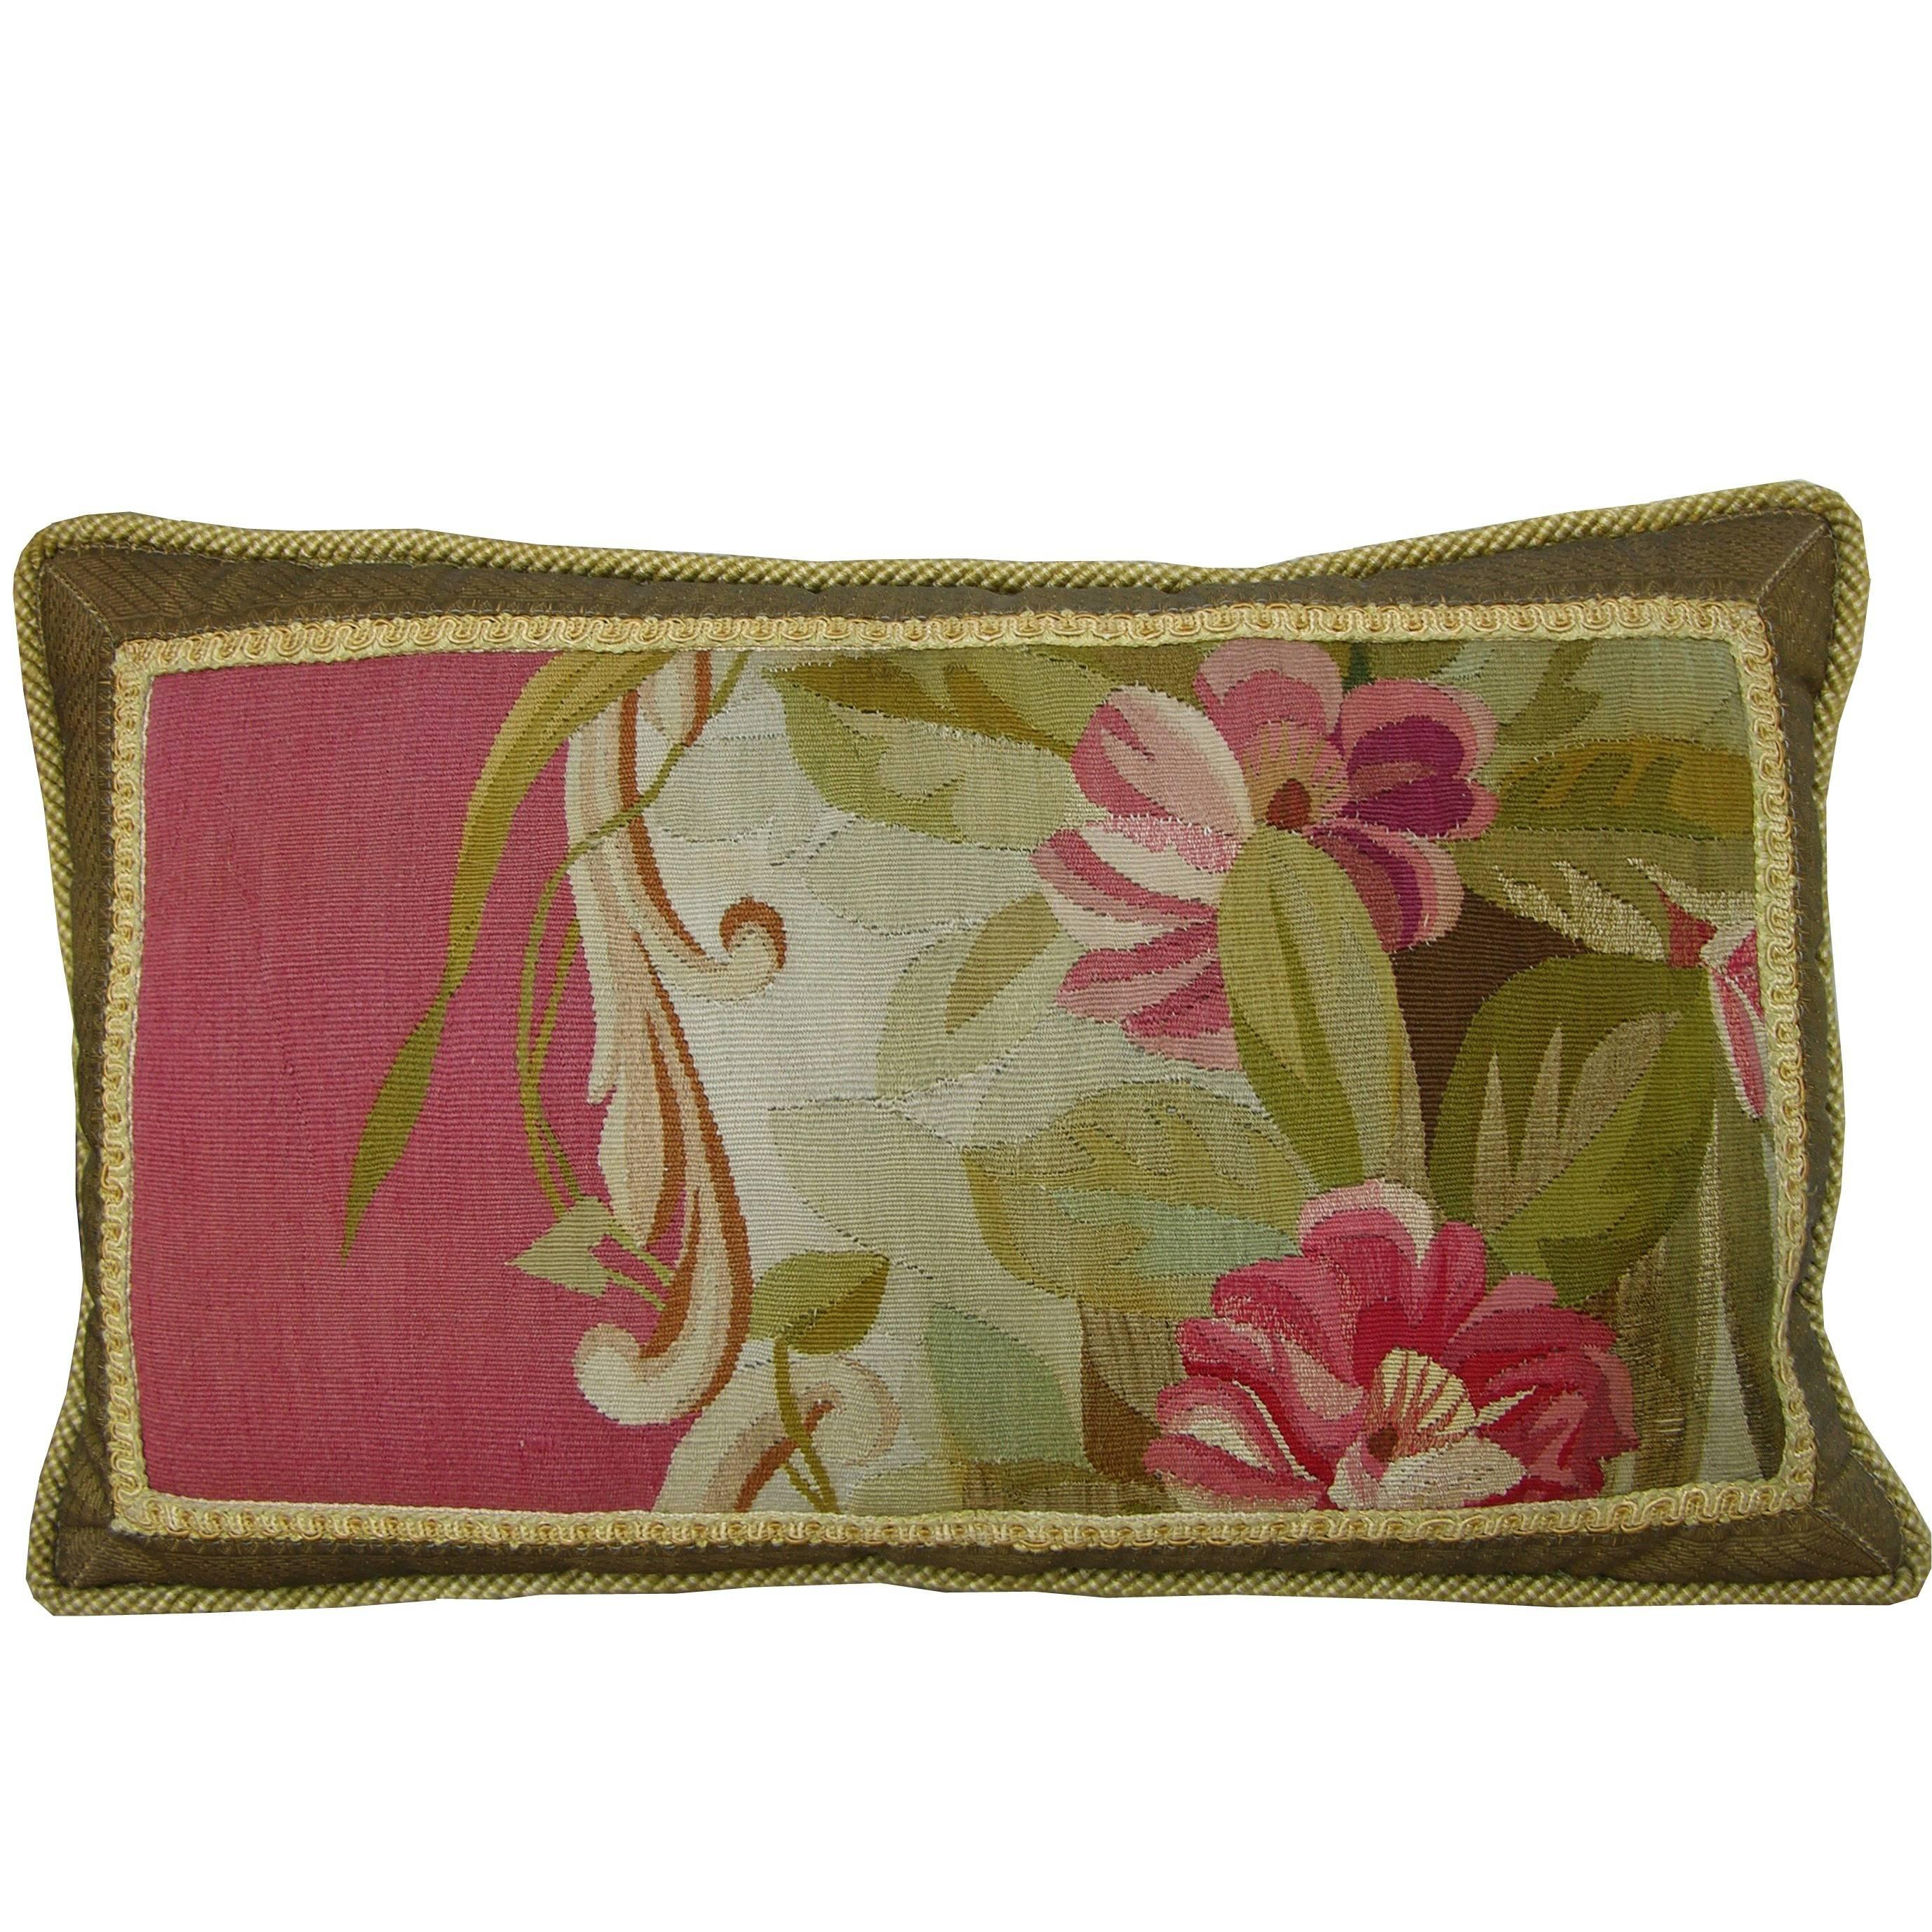 Antique French Aubusson Tapestry Pillow, circa 1860 1154p For Sale